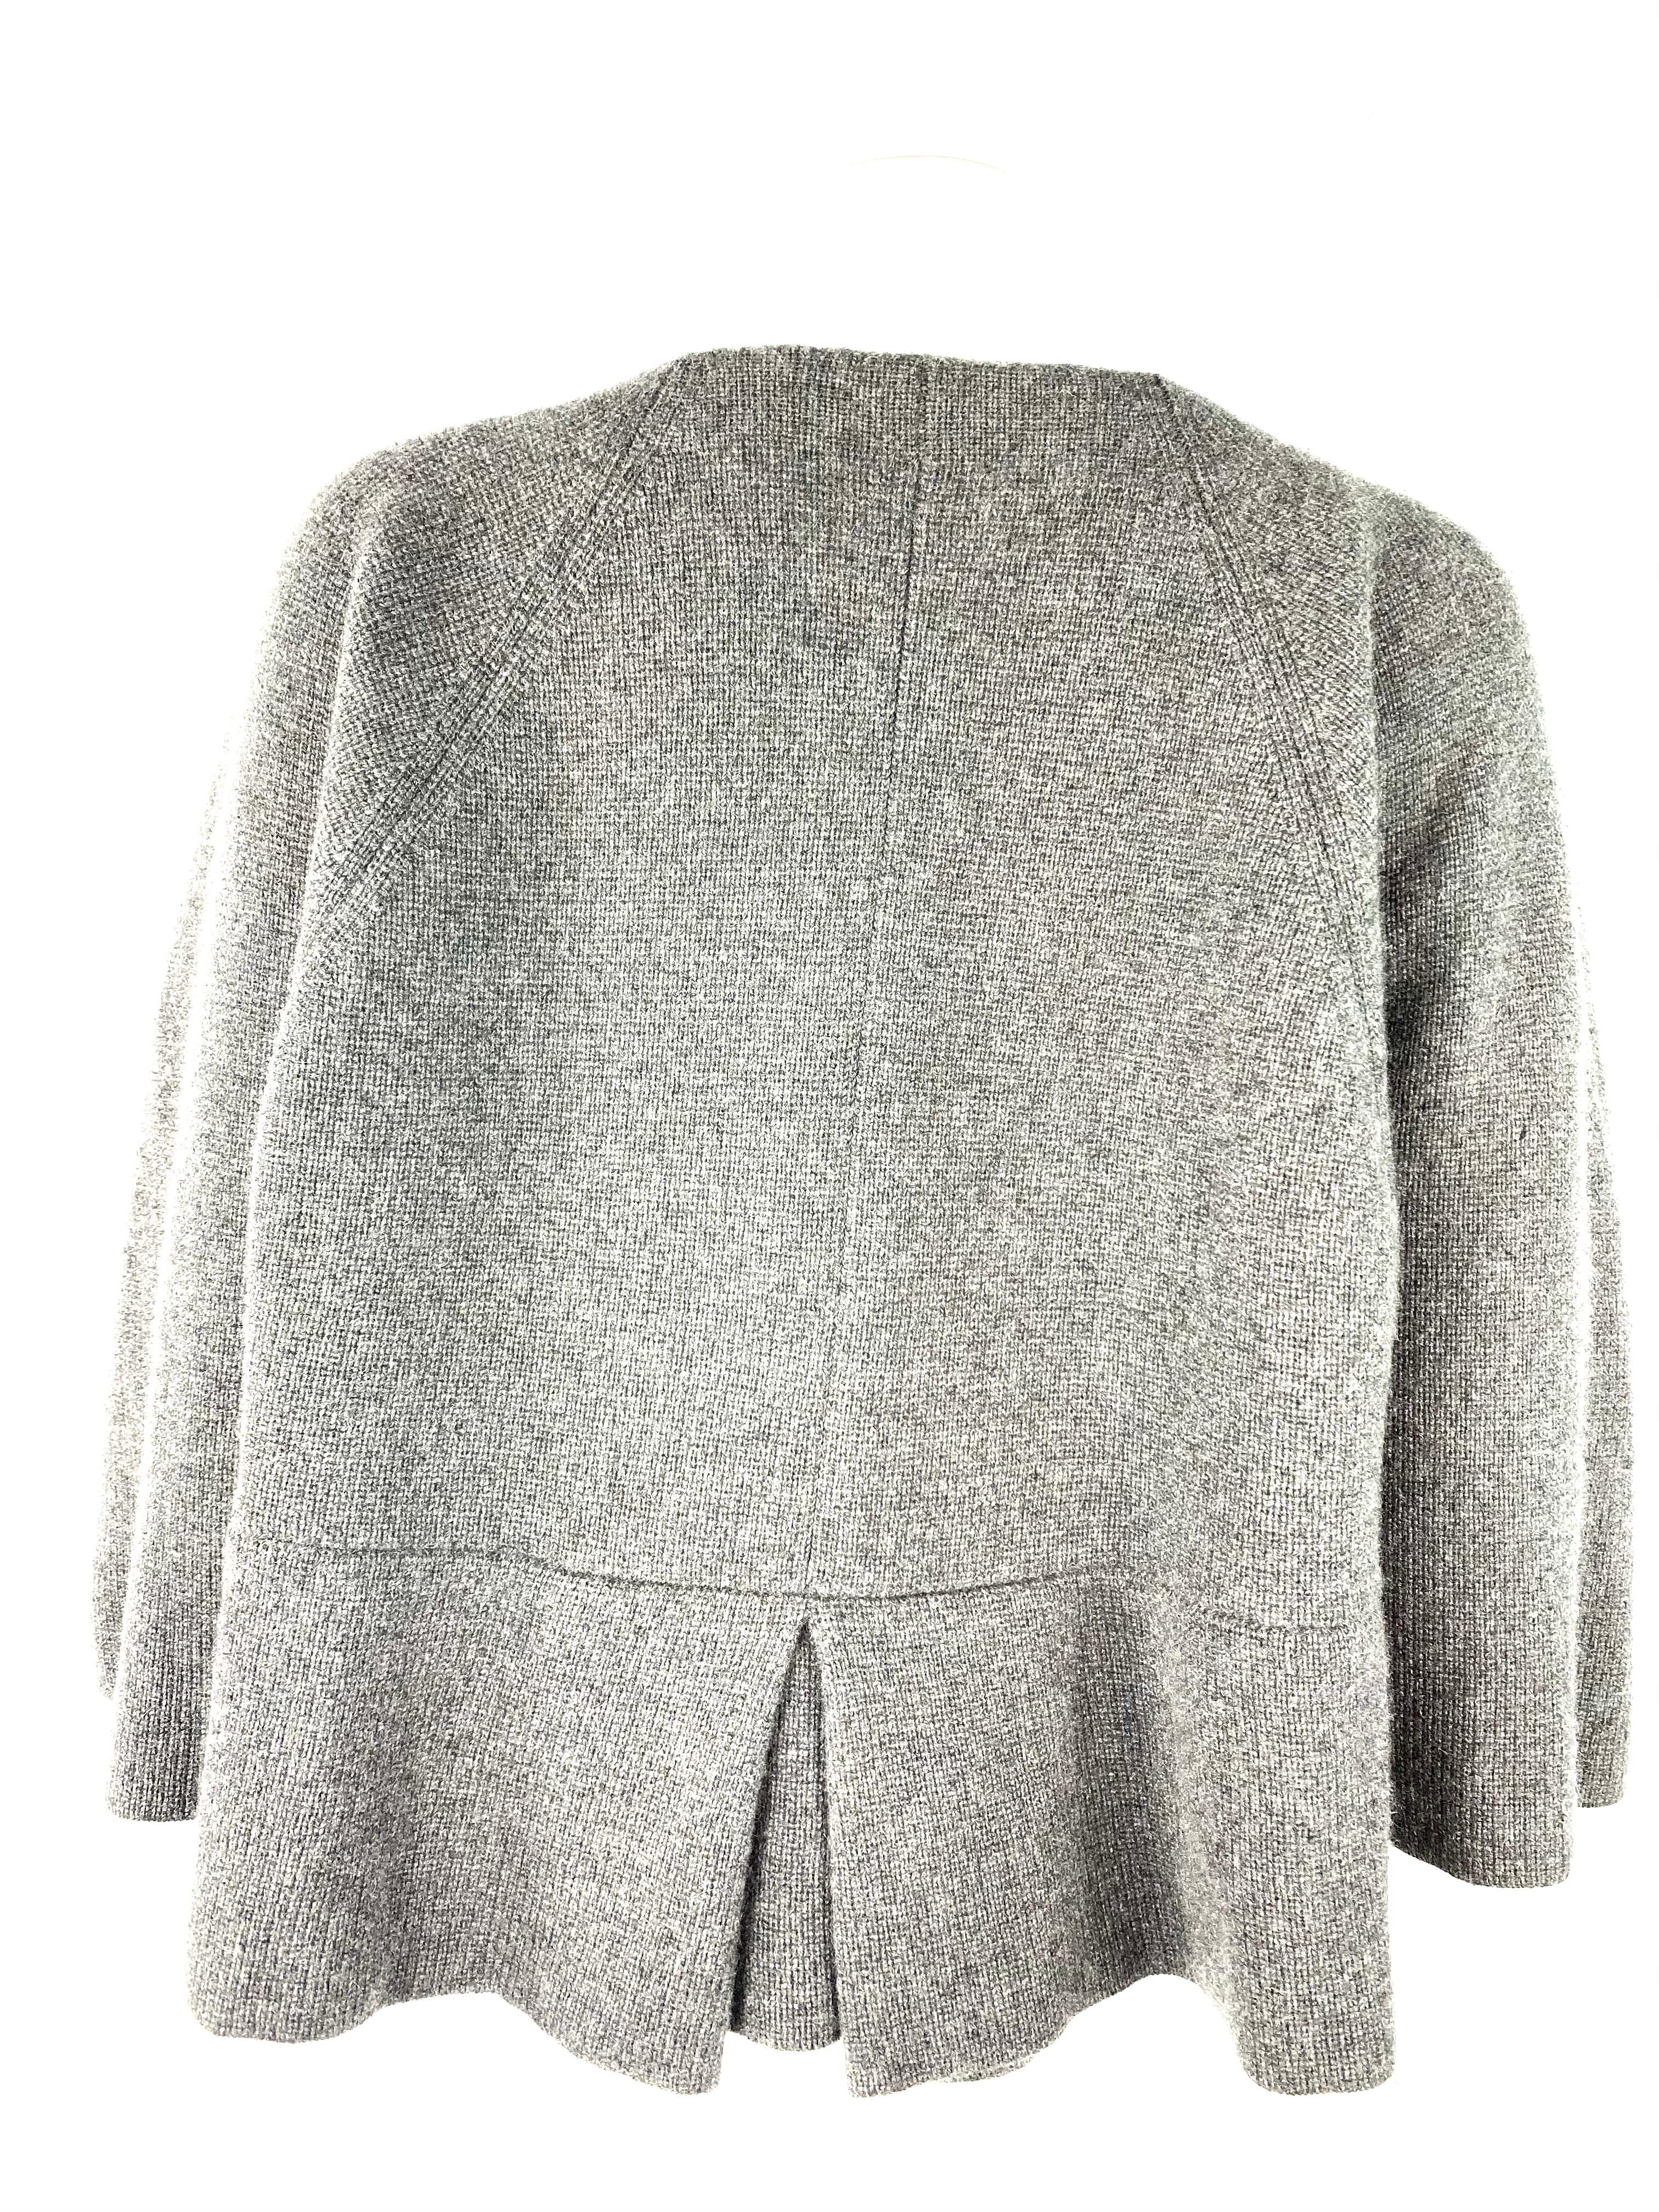 TSE Grey Cashmere Sweater Cardigan Top, Size S/M In Excellent Condition For Sale In Beverly Hills, CA